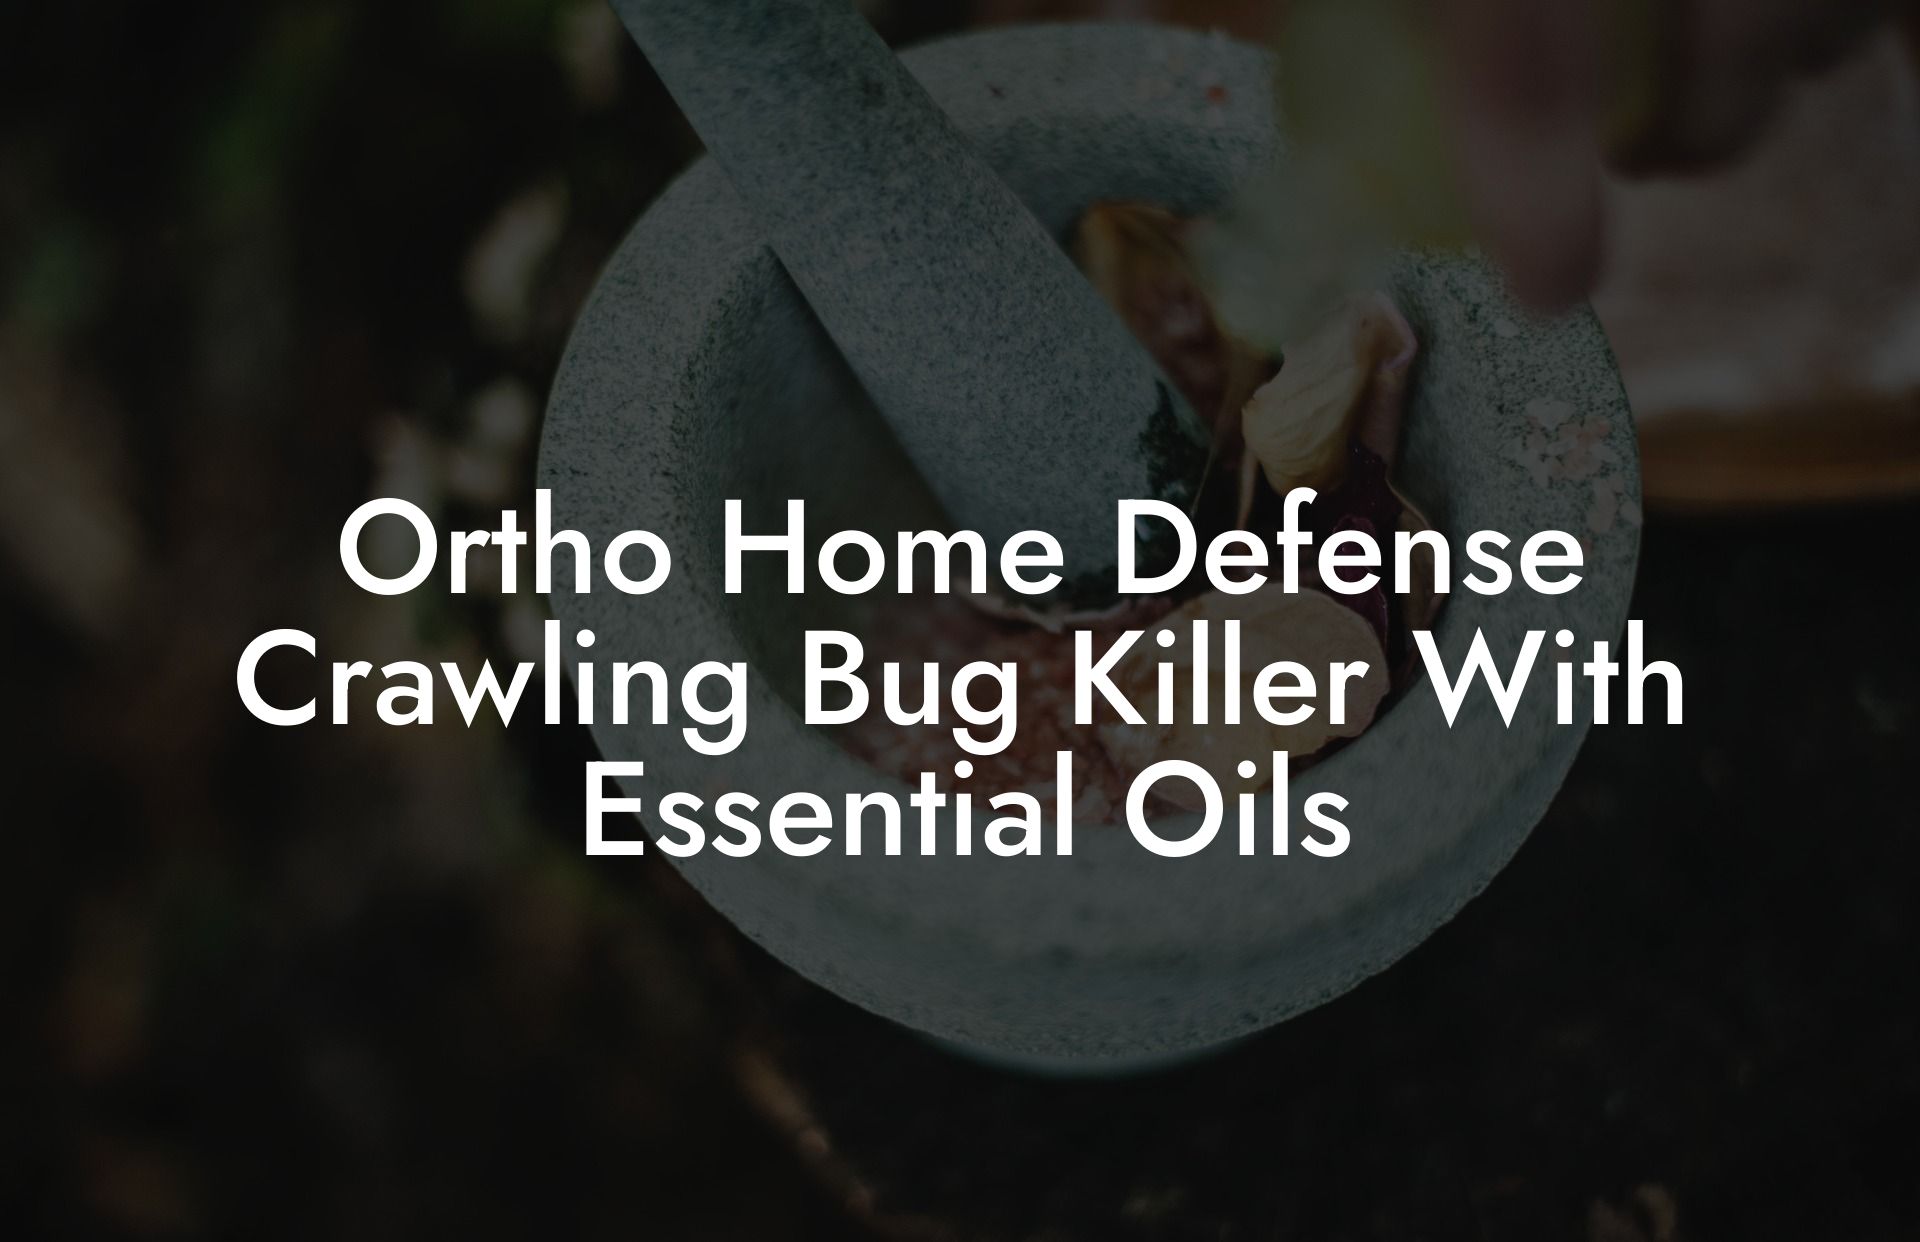 Ortho Home Defense Crawling Bug Killer With Essential Oils